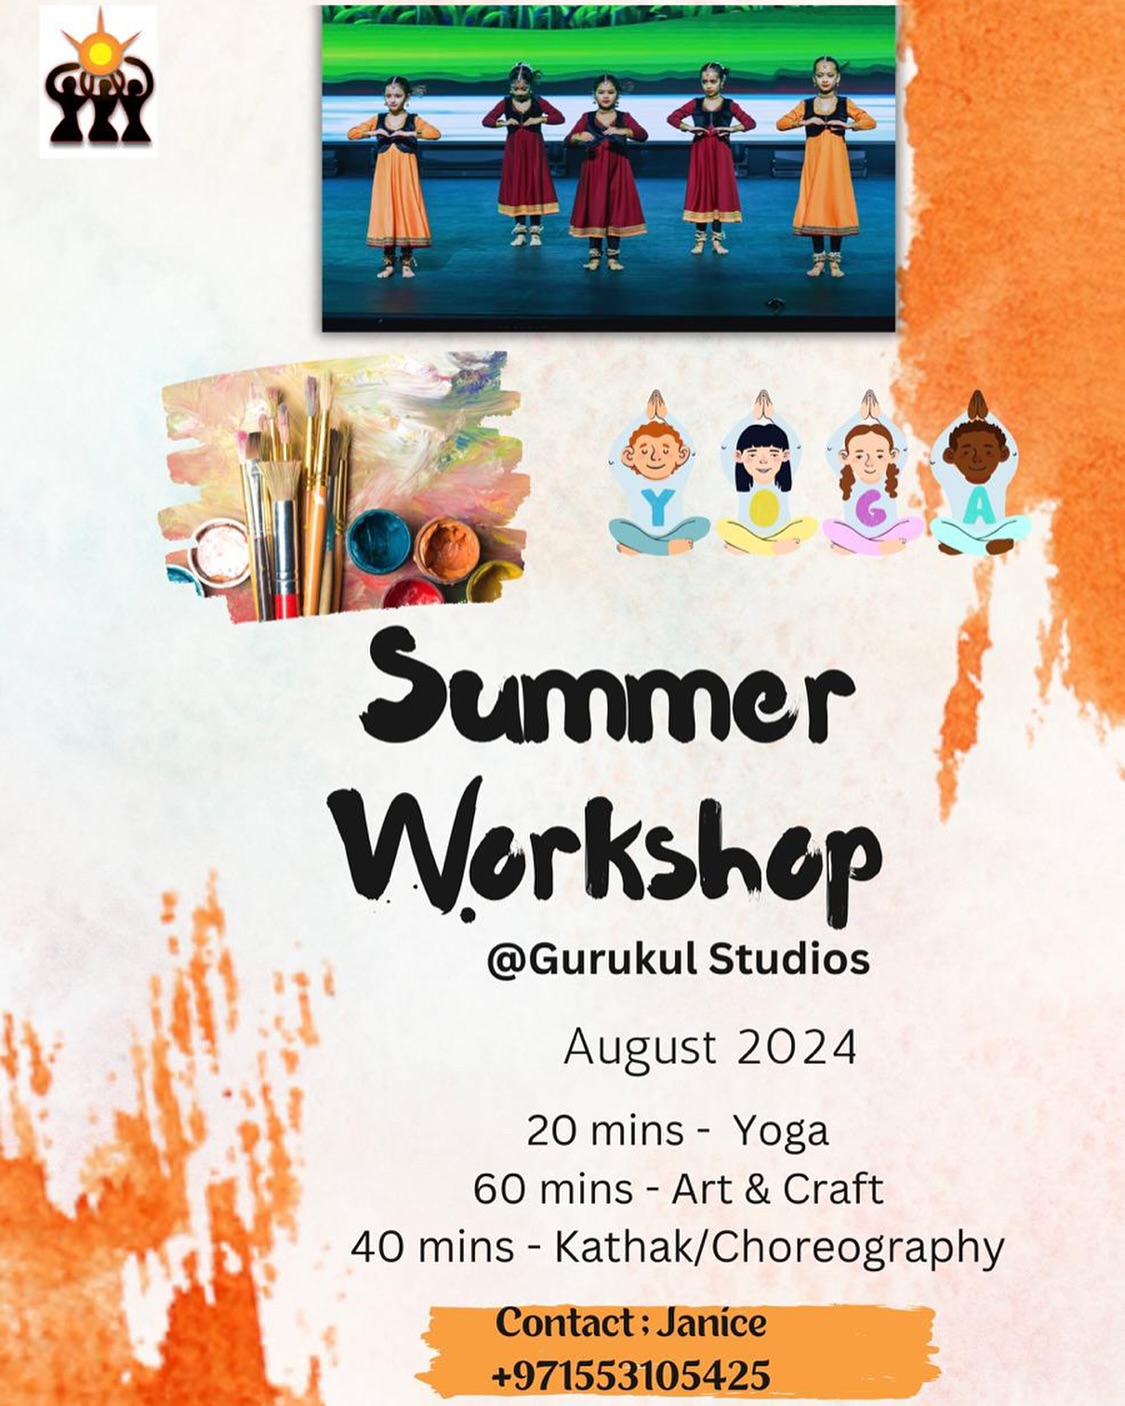 Dear Parents,

For our younger ones, the summer workshop would be a mix of activities to keep it interesting for them.

20 mins - Yoga
60 mins - Art & Craft
40 mins - Kathak/Choreography

One choreography would be taught during these 5 sessions in 2hrs and the kids can perform this at school or personal events.

Kindly register you interest with Janice on 0553105425 at the earliest.

Looking forward to a fun filled Summer🌞💃🏼

Thank you
Team Gurukul